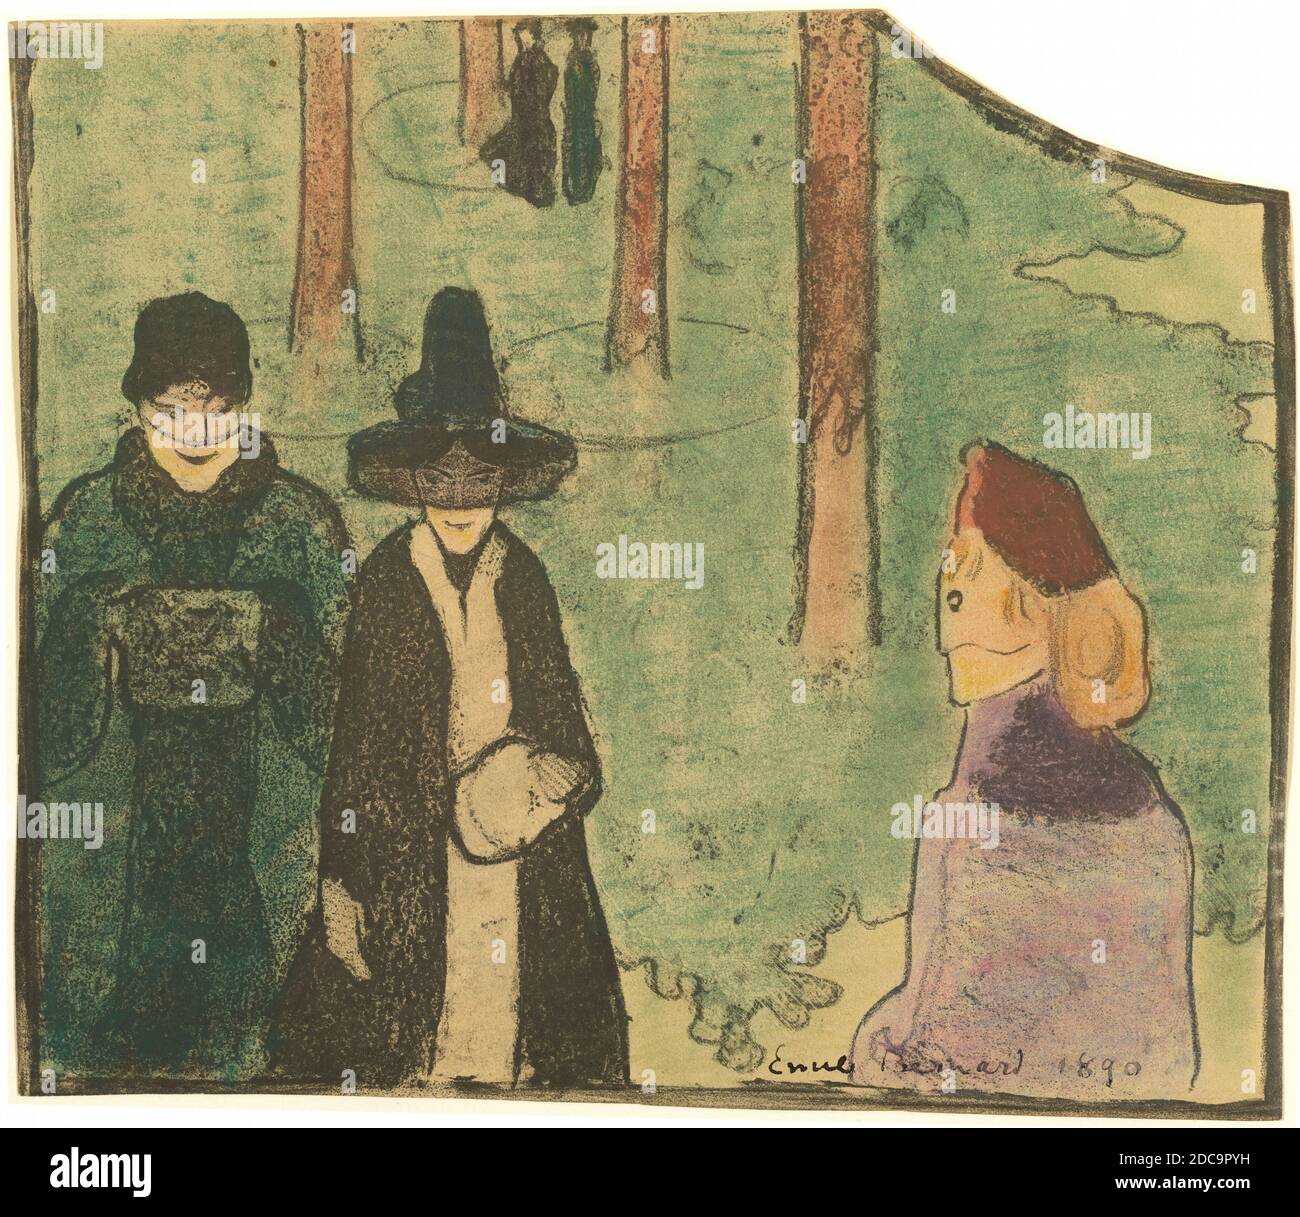 Emile Bernard, (artist), French, 1868 - 1941, In the Woods, 1890, hand-colored lithograph (zinc), sheet (trimmed to image): 19.7 x 23.1 cm (7 3/4 x 9 1/8 in Stock Photo